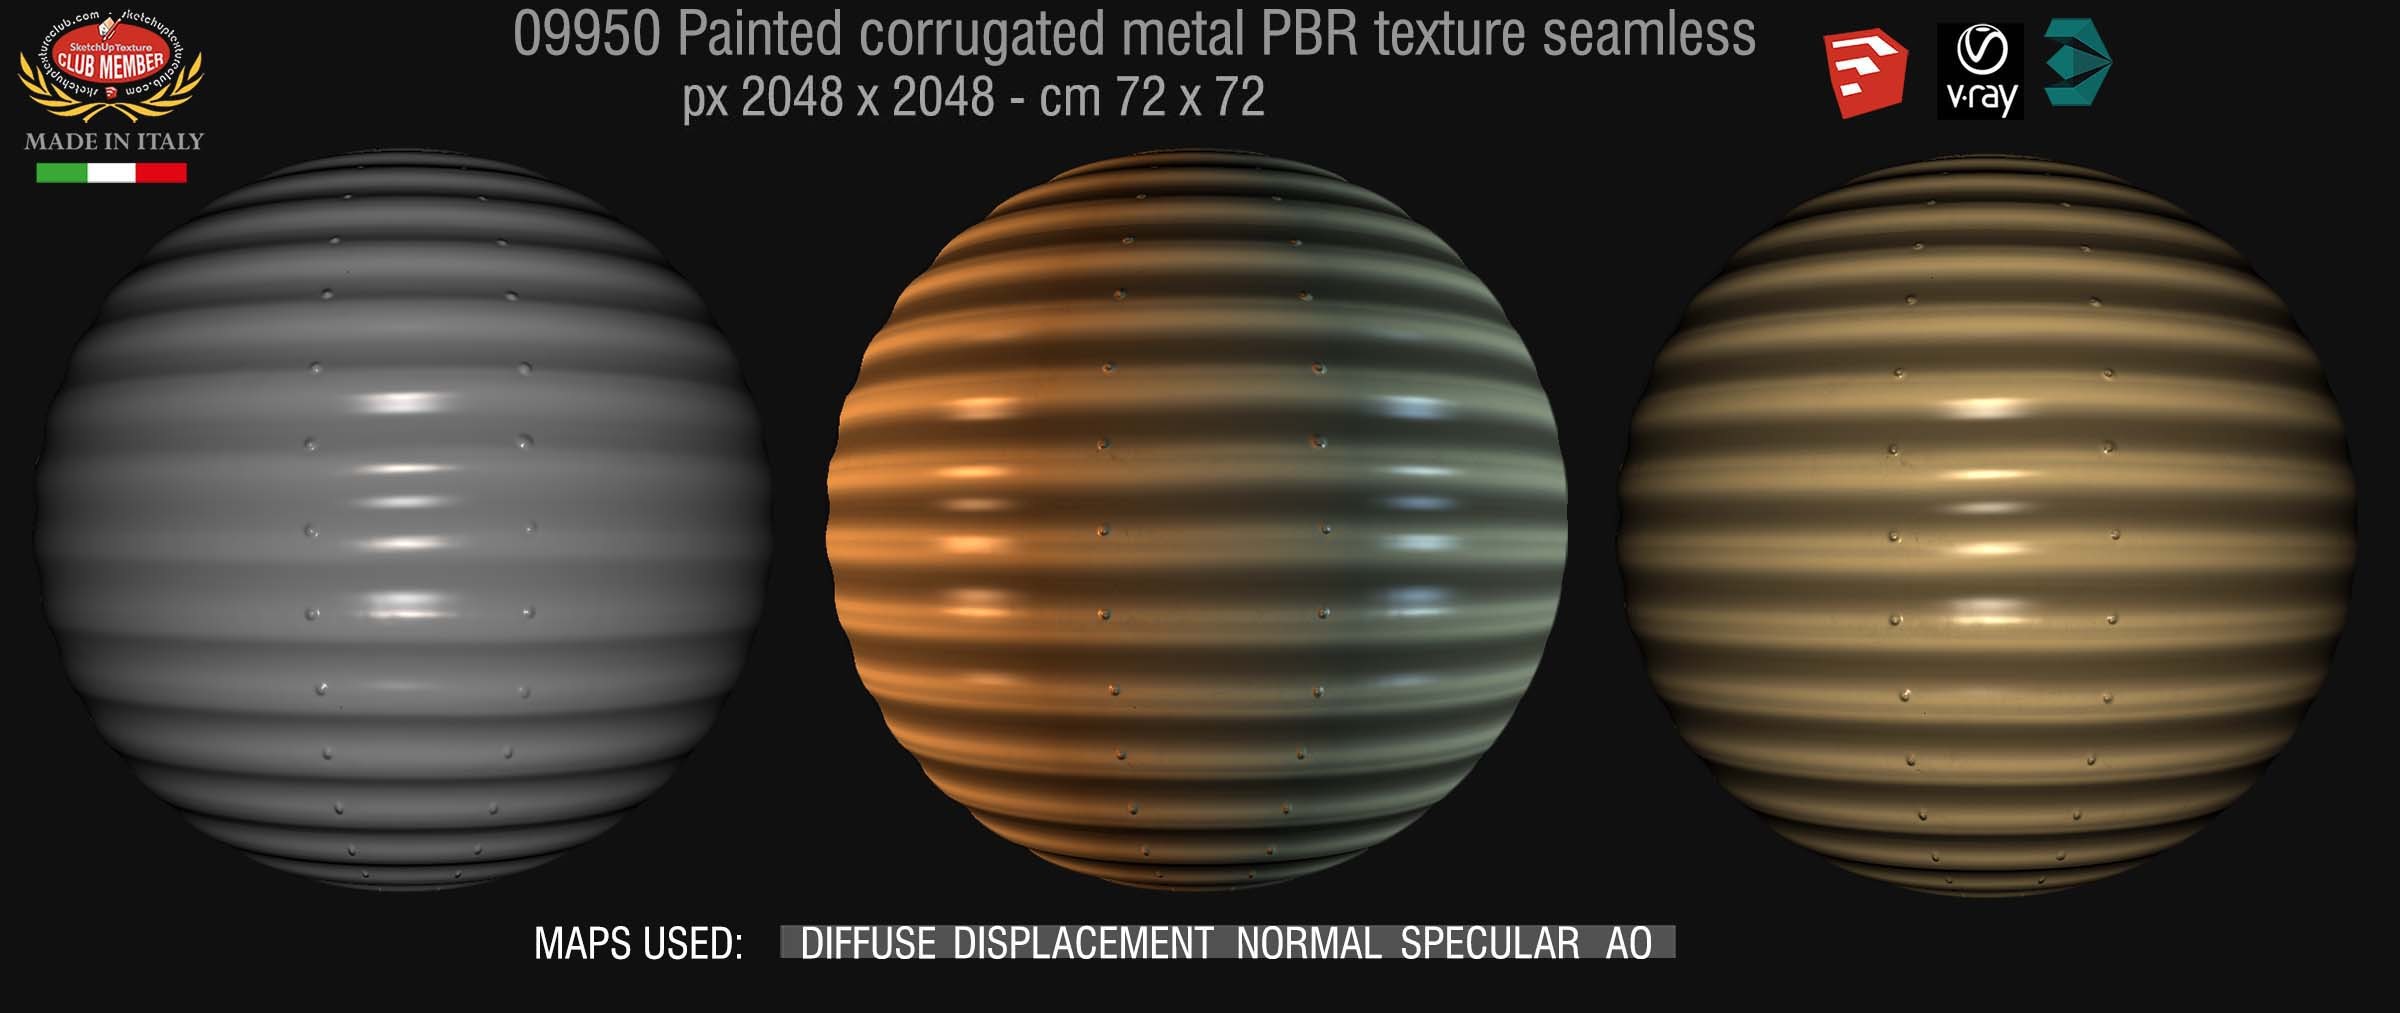 09950 Painted corrugated steel PBR texture seamless DEMO